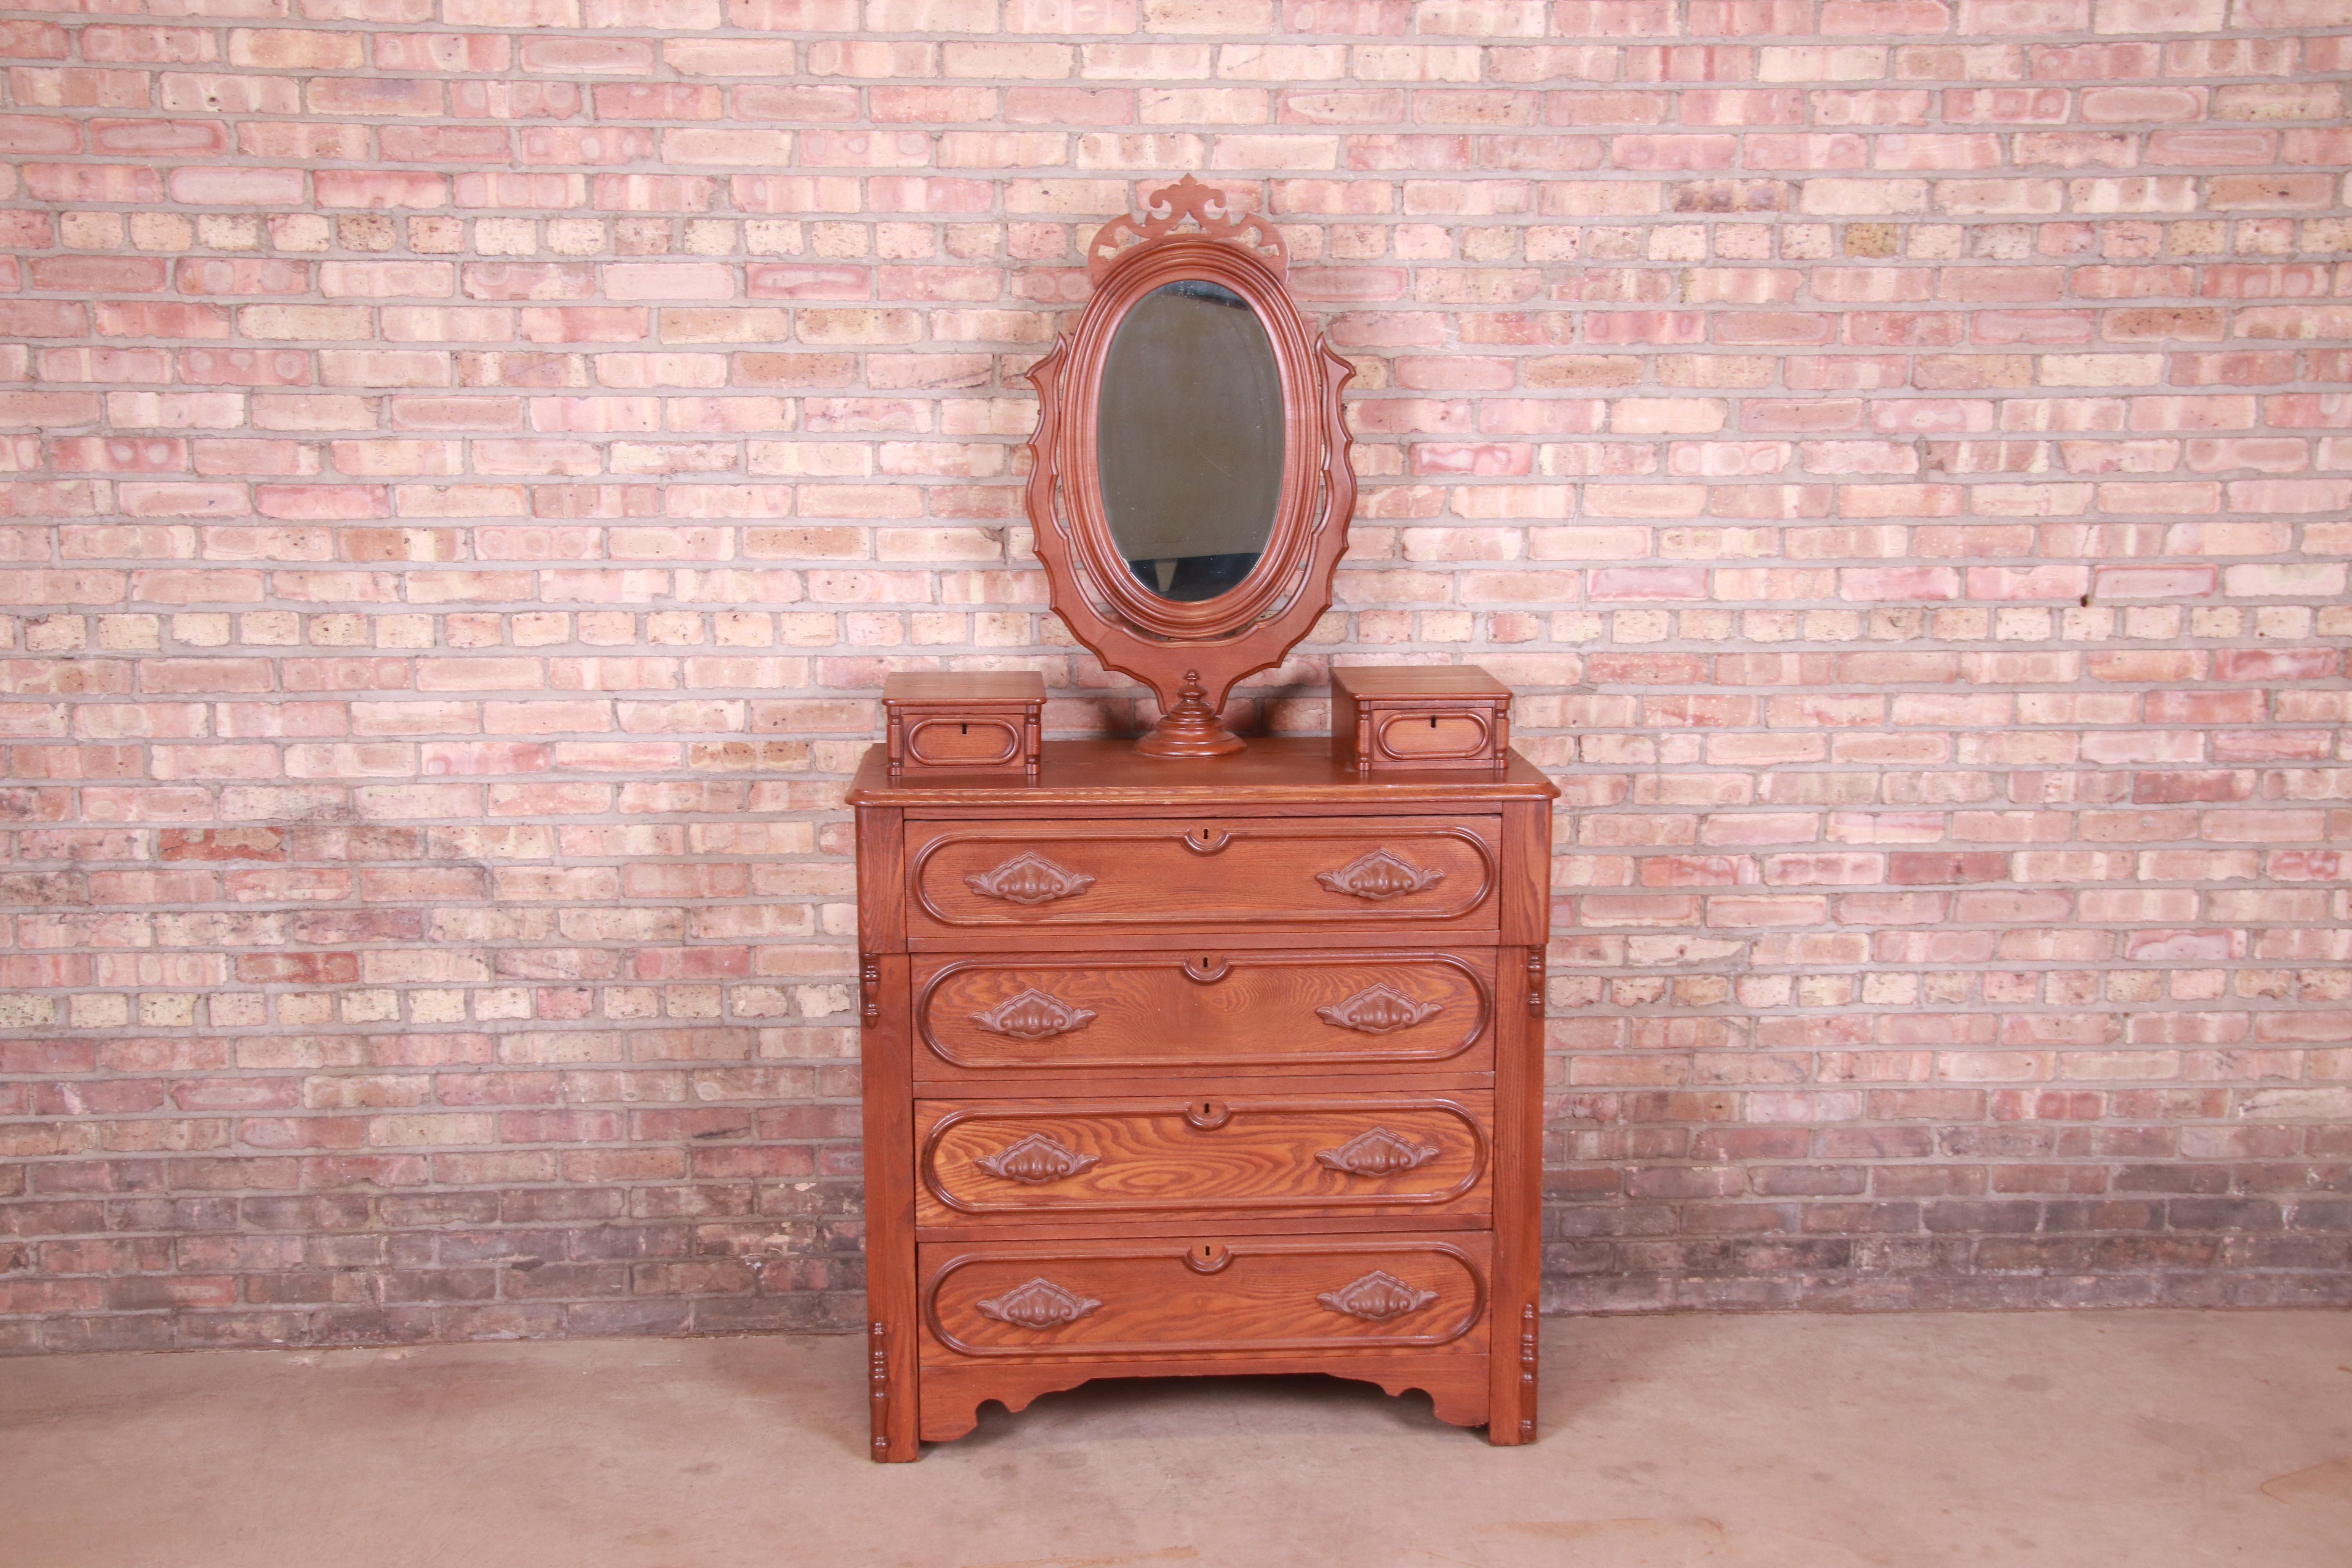 A gorgeous antique Victorian carved oak dresser with mirror

USA, Circa 1880s

Measures: 41